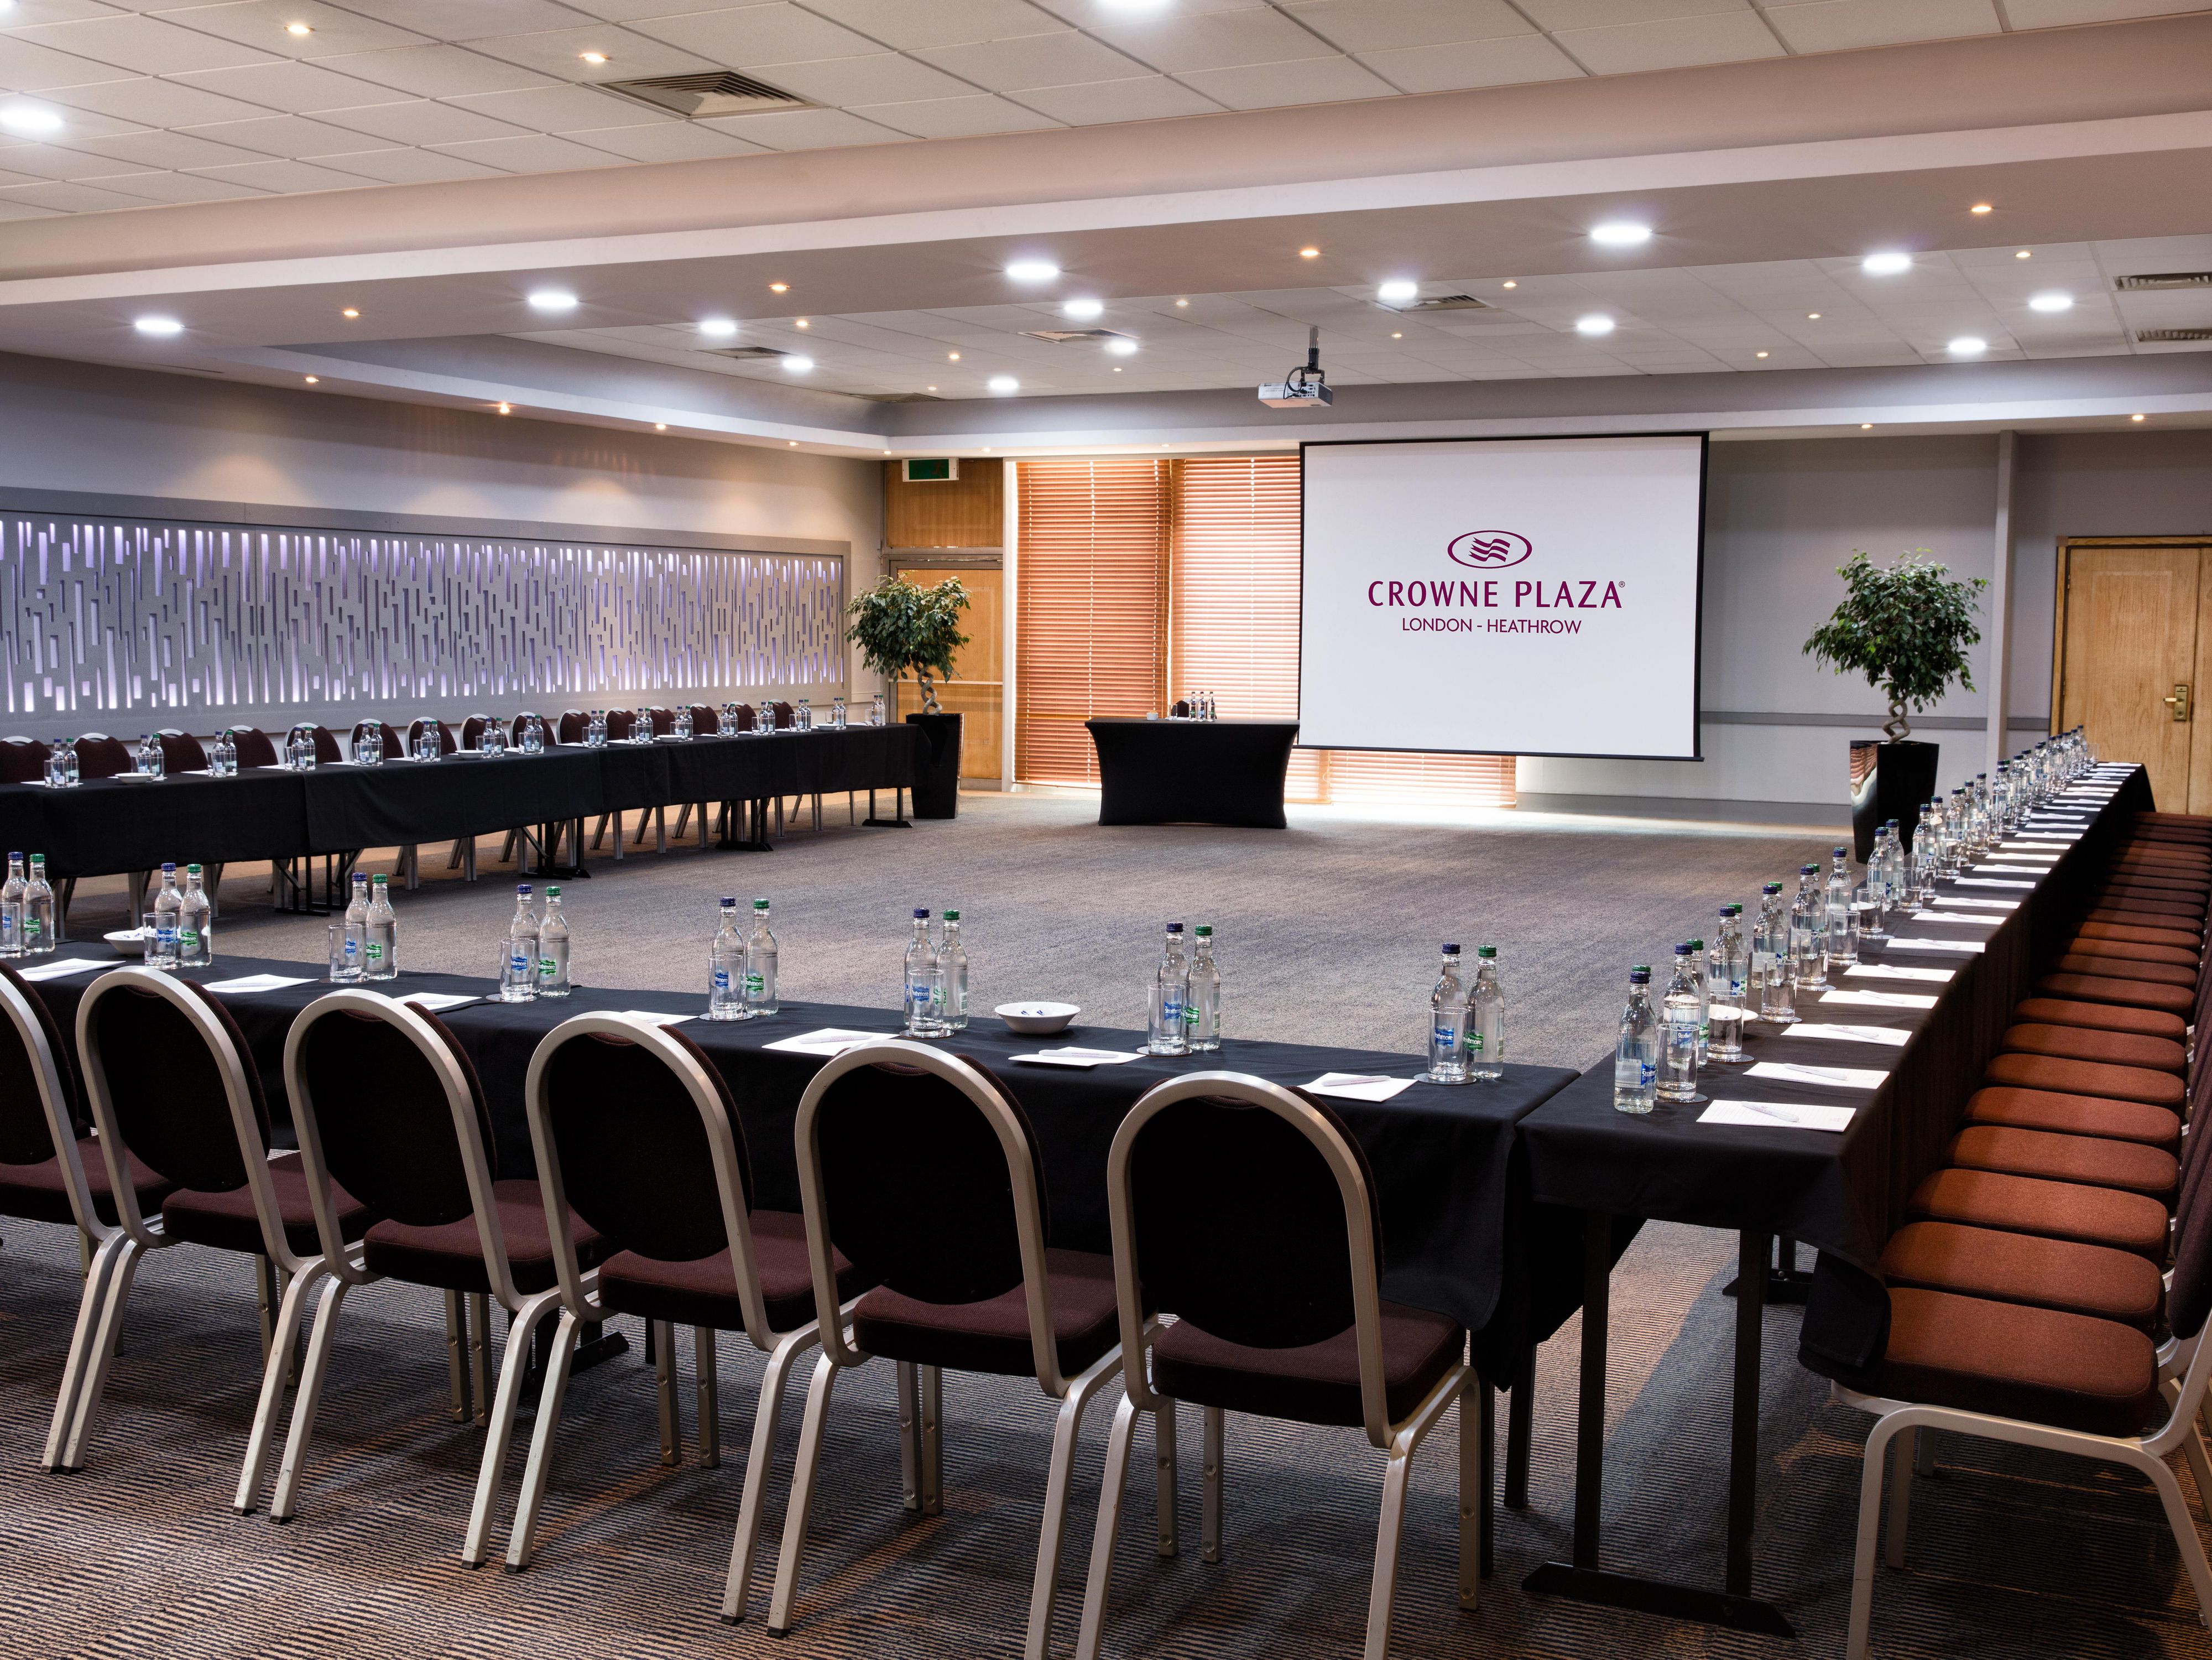 Host meetings or events for 2 to 250 guests in our fully equipped, versatile meeting rooms. Each with floor to ceiling windows providing plenty of natural daylight, Wi-Fi and a dedicated team to support with both planning and delivery of your event. 